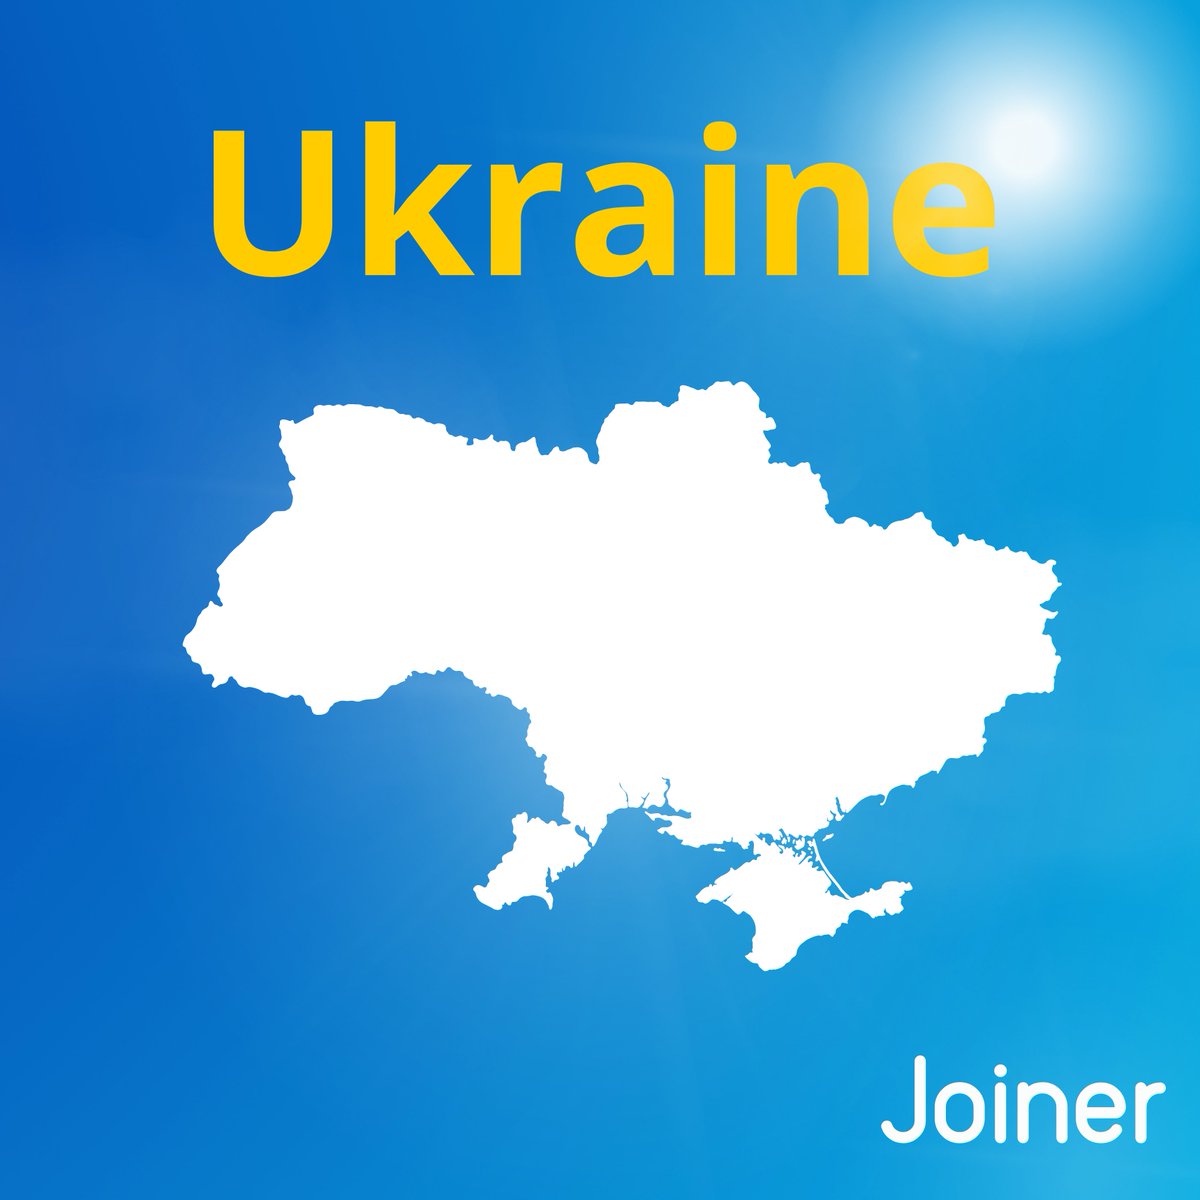 A big welcome to Joiner, Ukraine! 🇺🇦 #joiner #Join #joinerapp #seeyouthere #friends #community #communitystrong #technology #technews #app #social #socialapp #ukraine #home